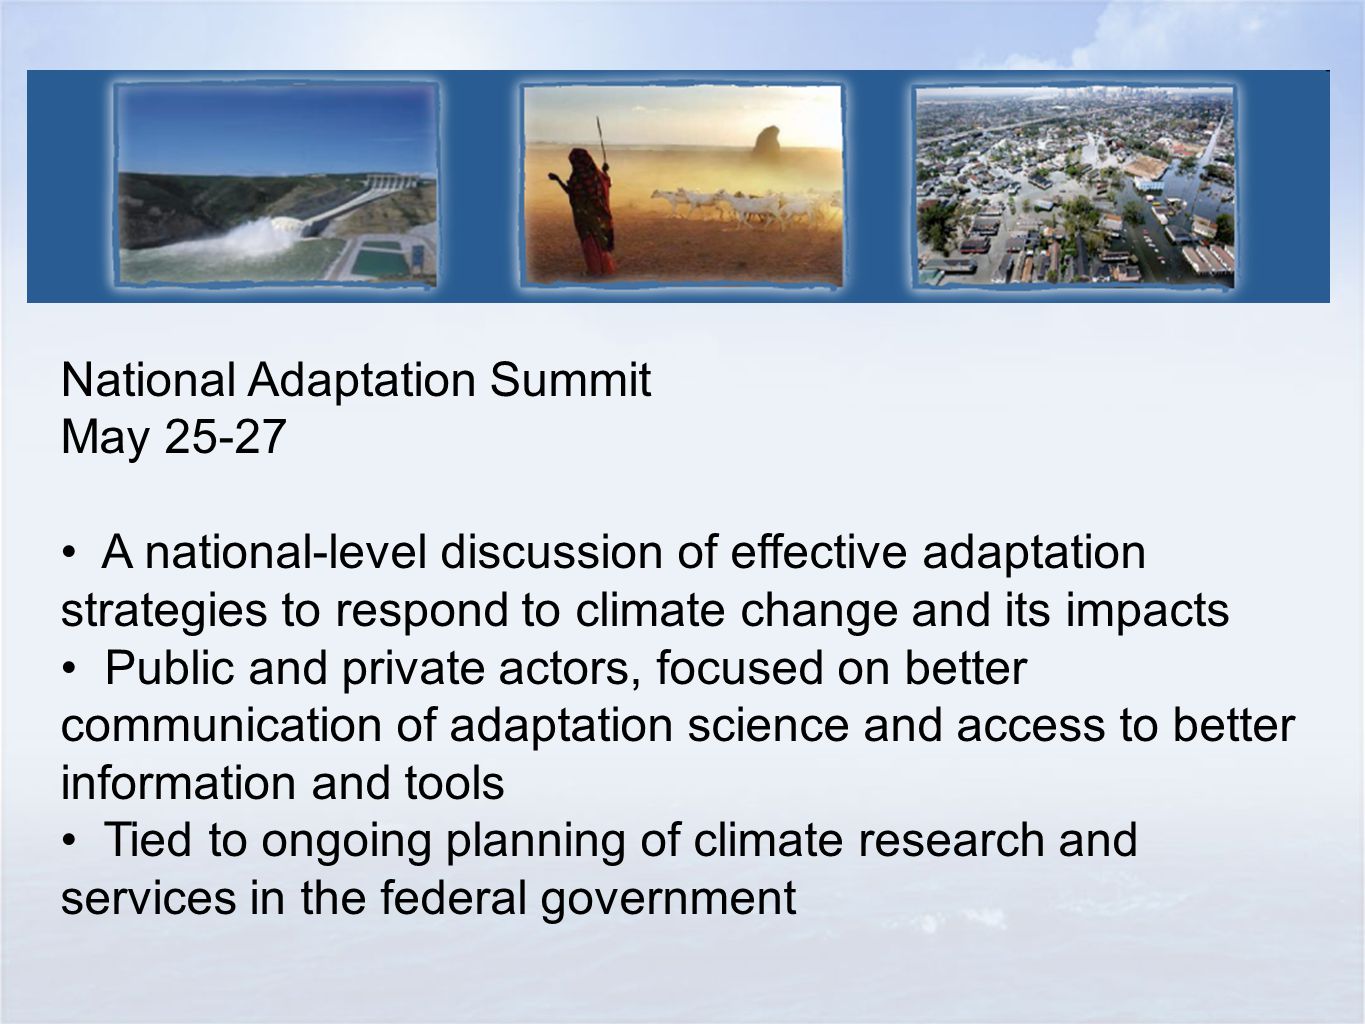 National Adaptation Summit May A national-level discussion of effective adaptation strategies to respond to climate change and its impacts Public and private actors, focused on better communication of adaptation science and access to better information and tools Tied to ongoing planning of climate research and services in the federal government